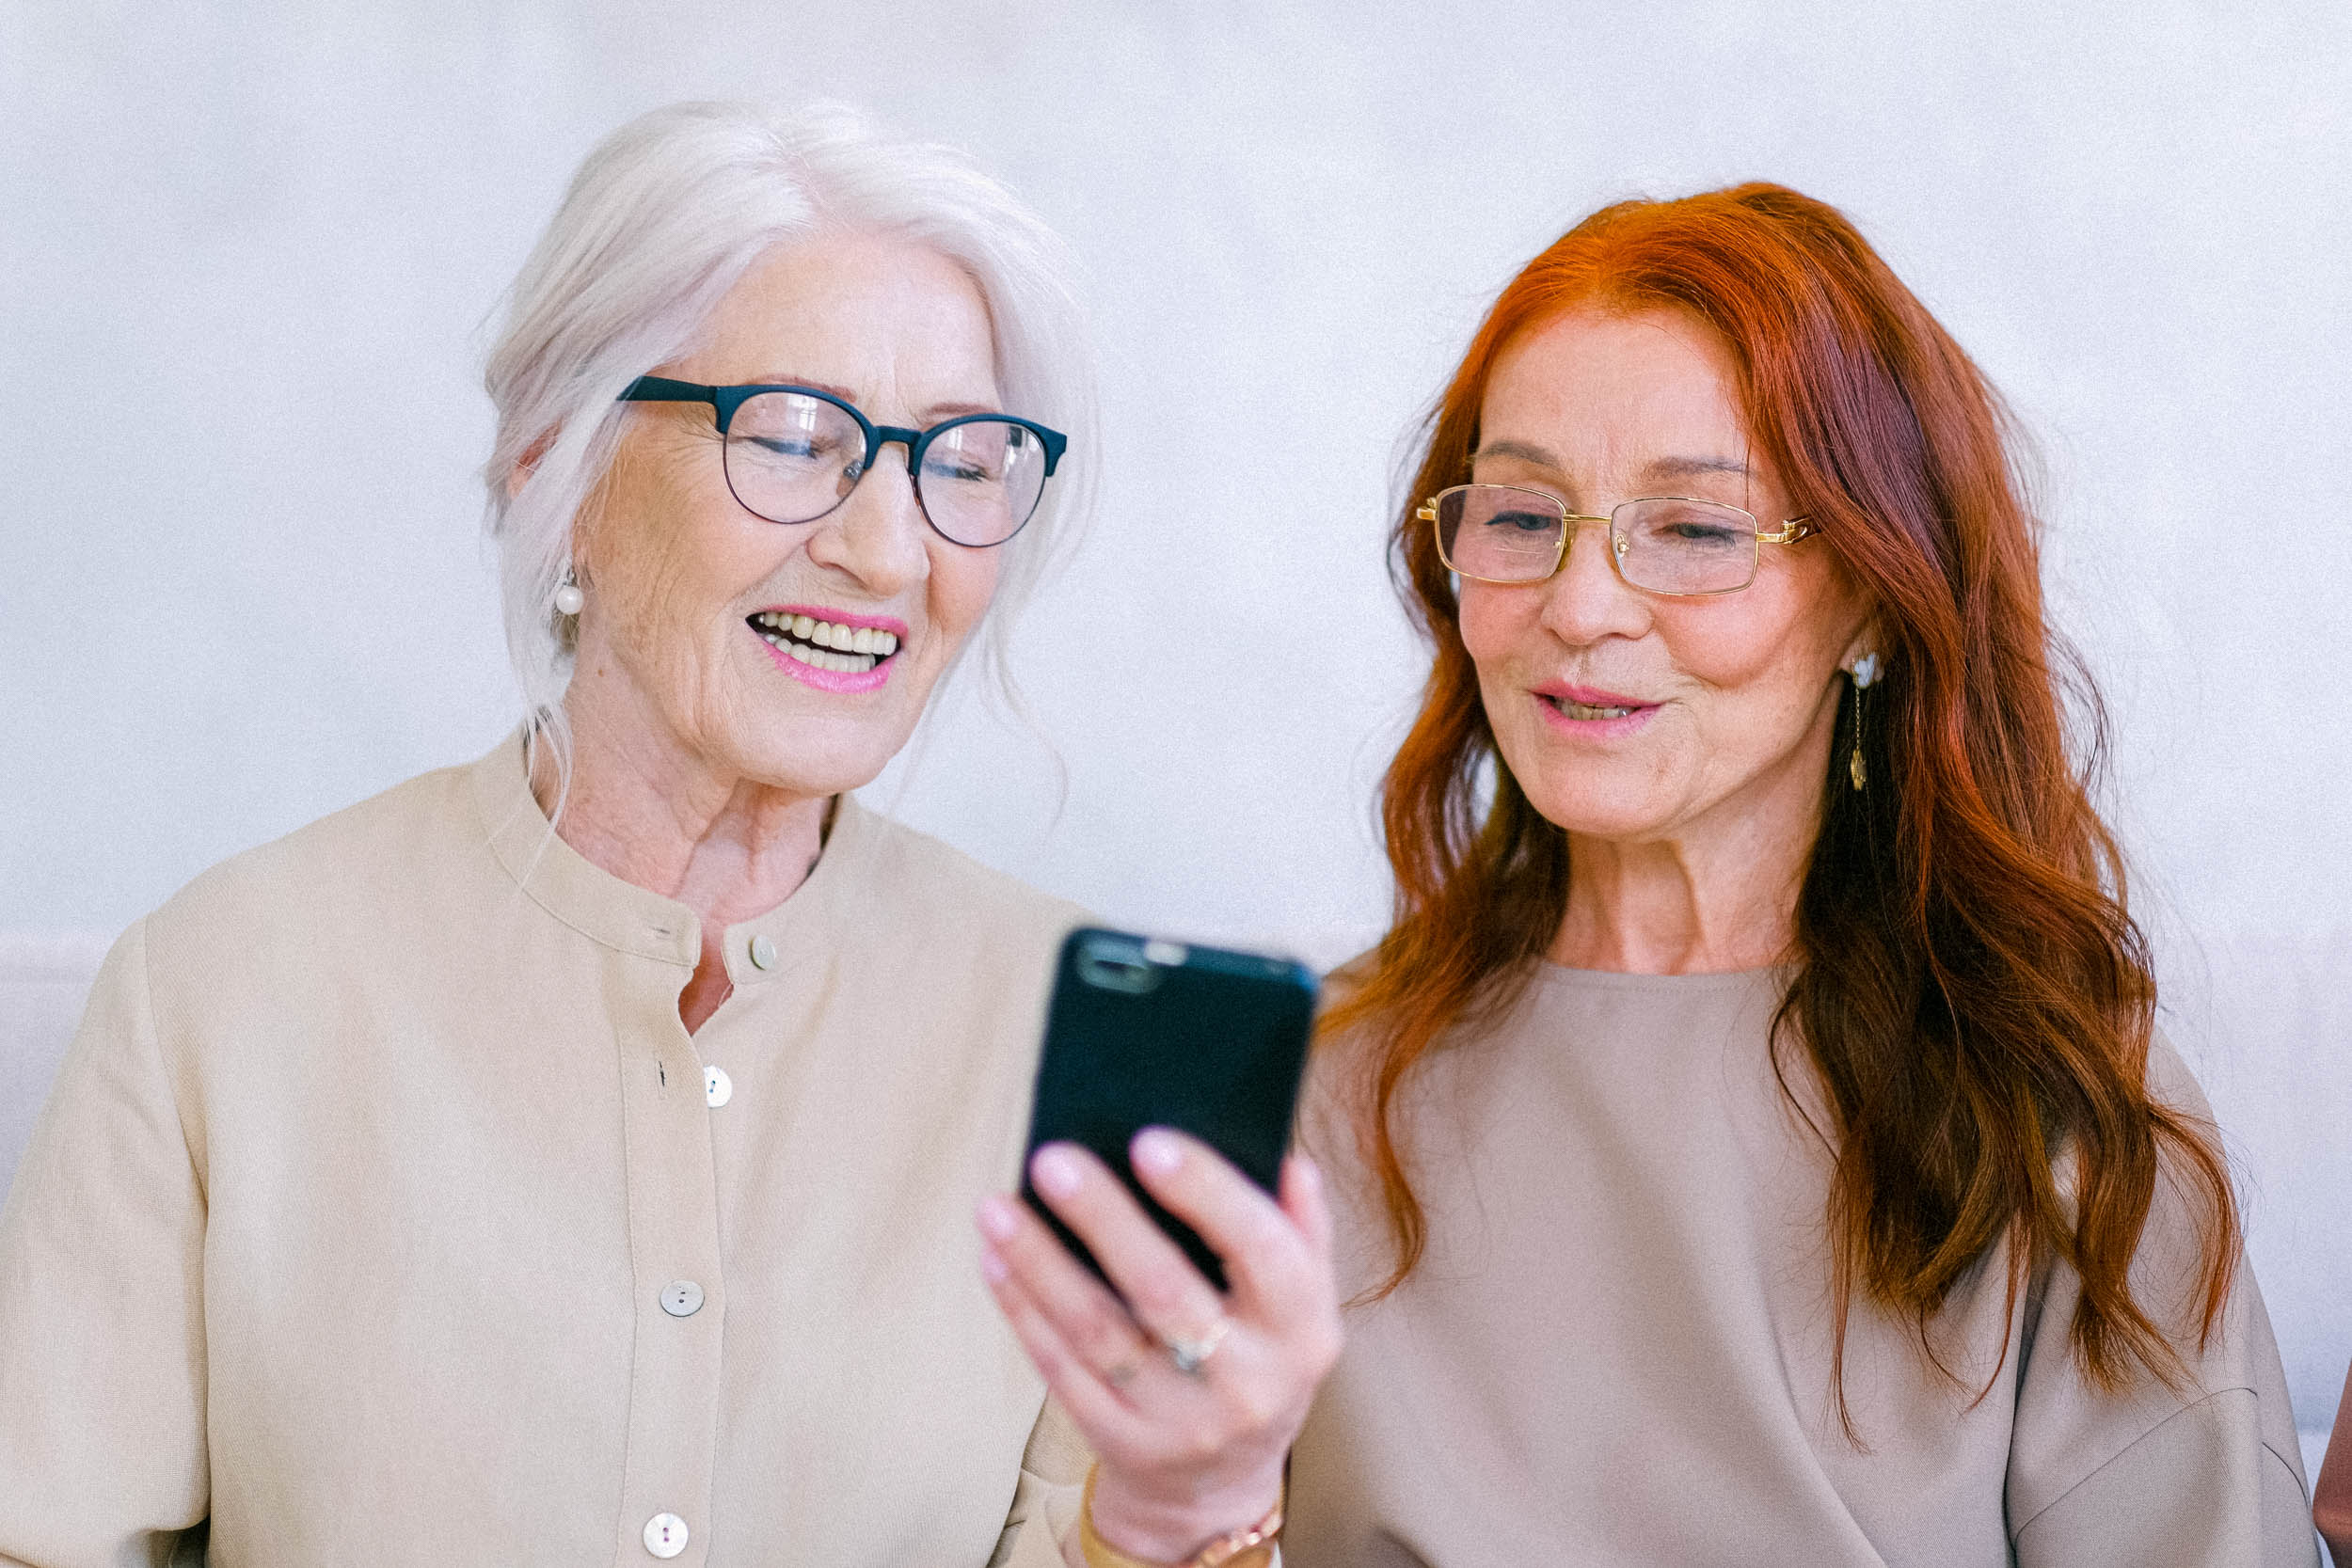 women-laughing-looking-at-phone